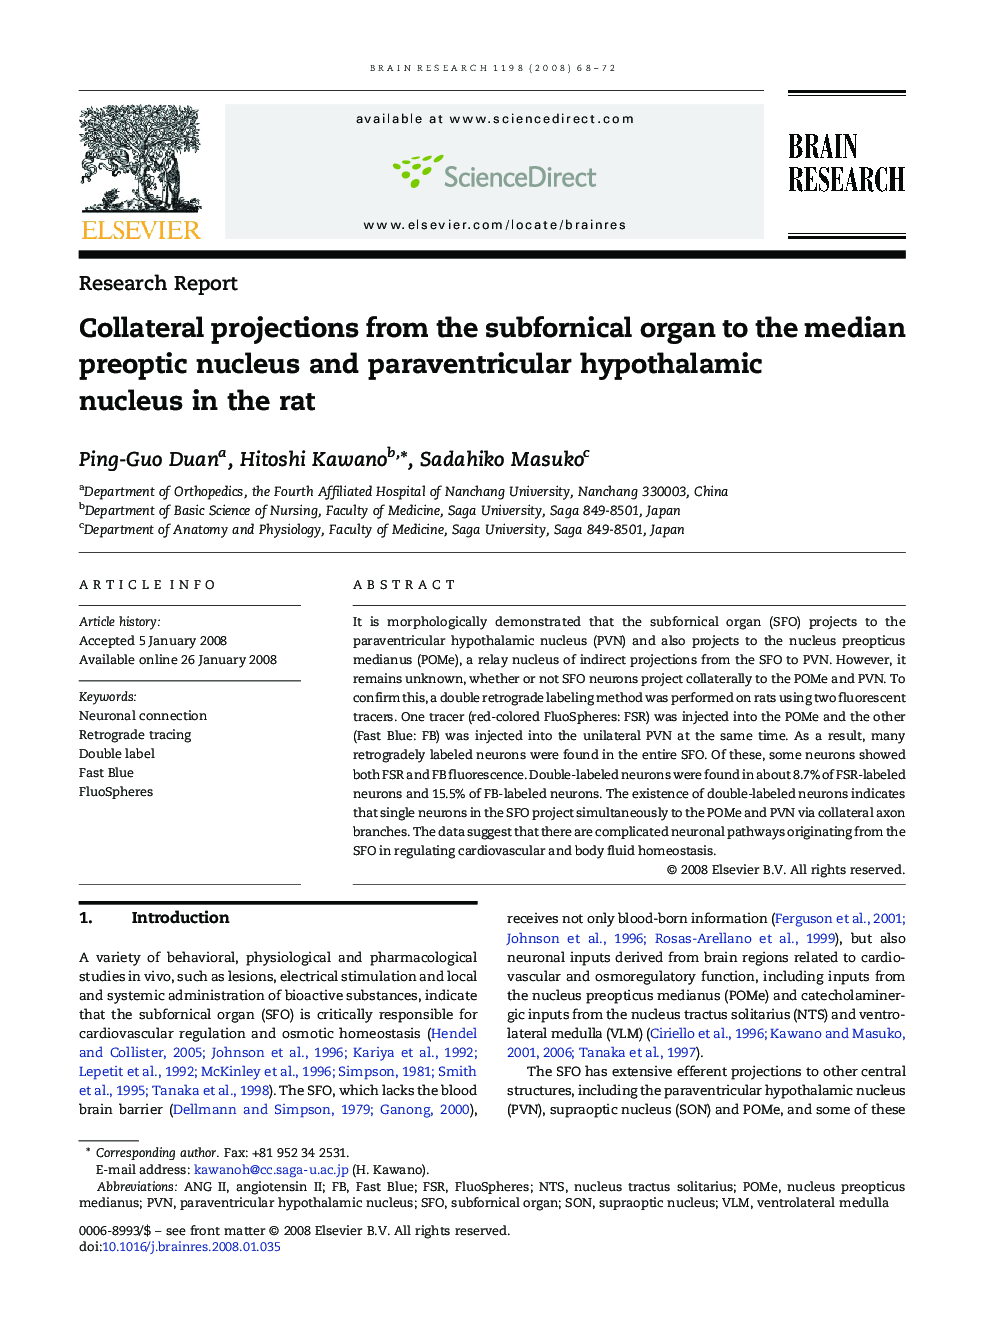 Collateral projections from the subfornical organ to the median preoptic nucleus and paraventricular hypothalamic nucleus in the rat